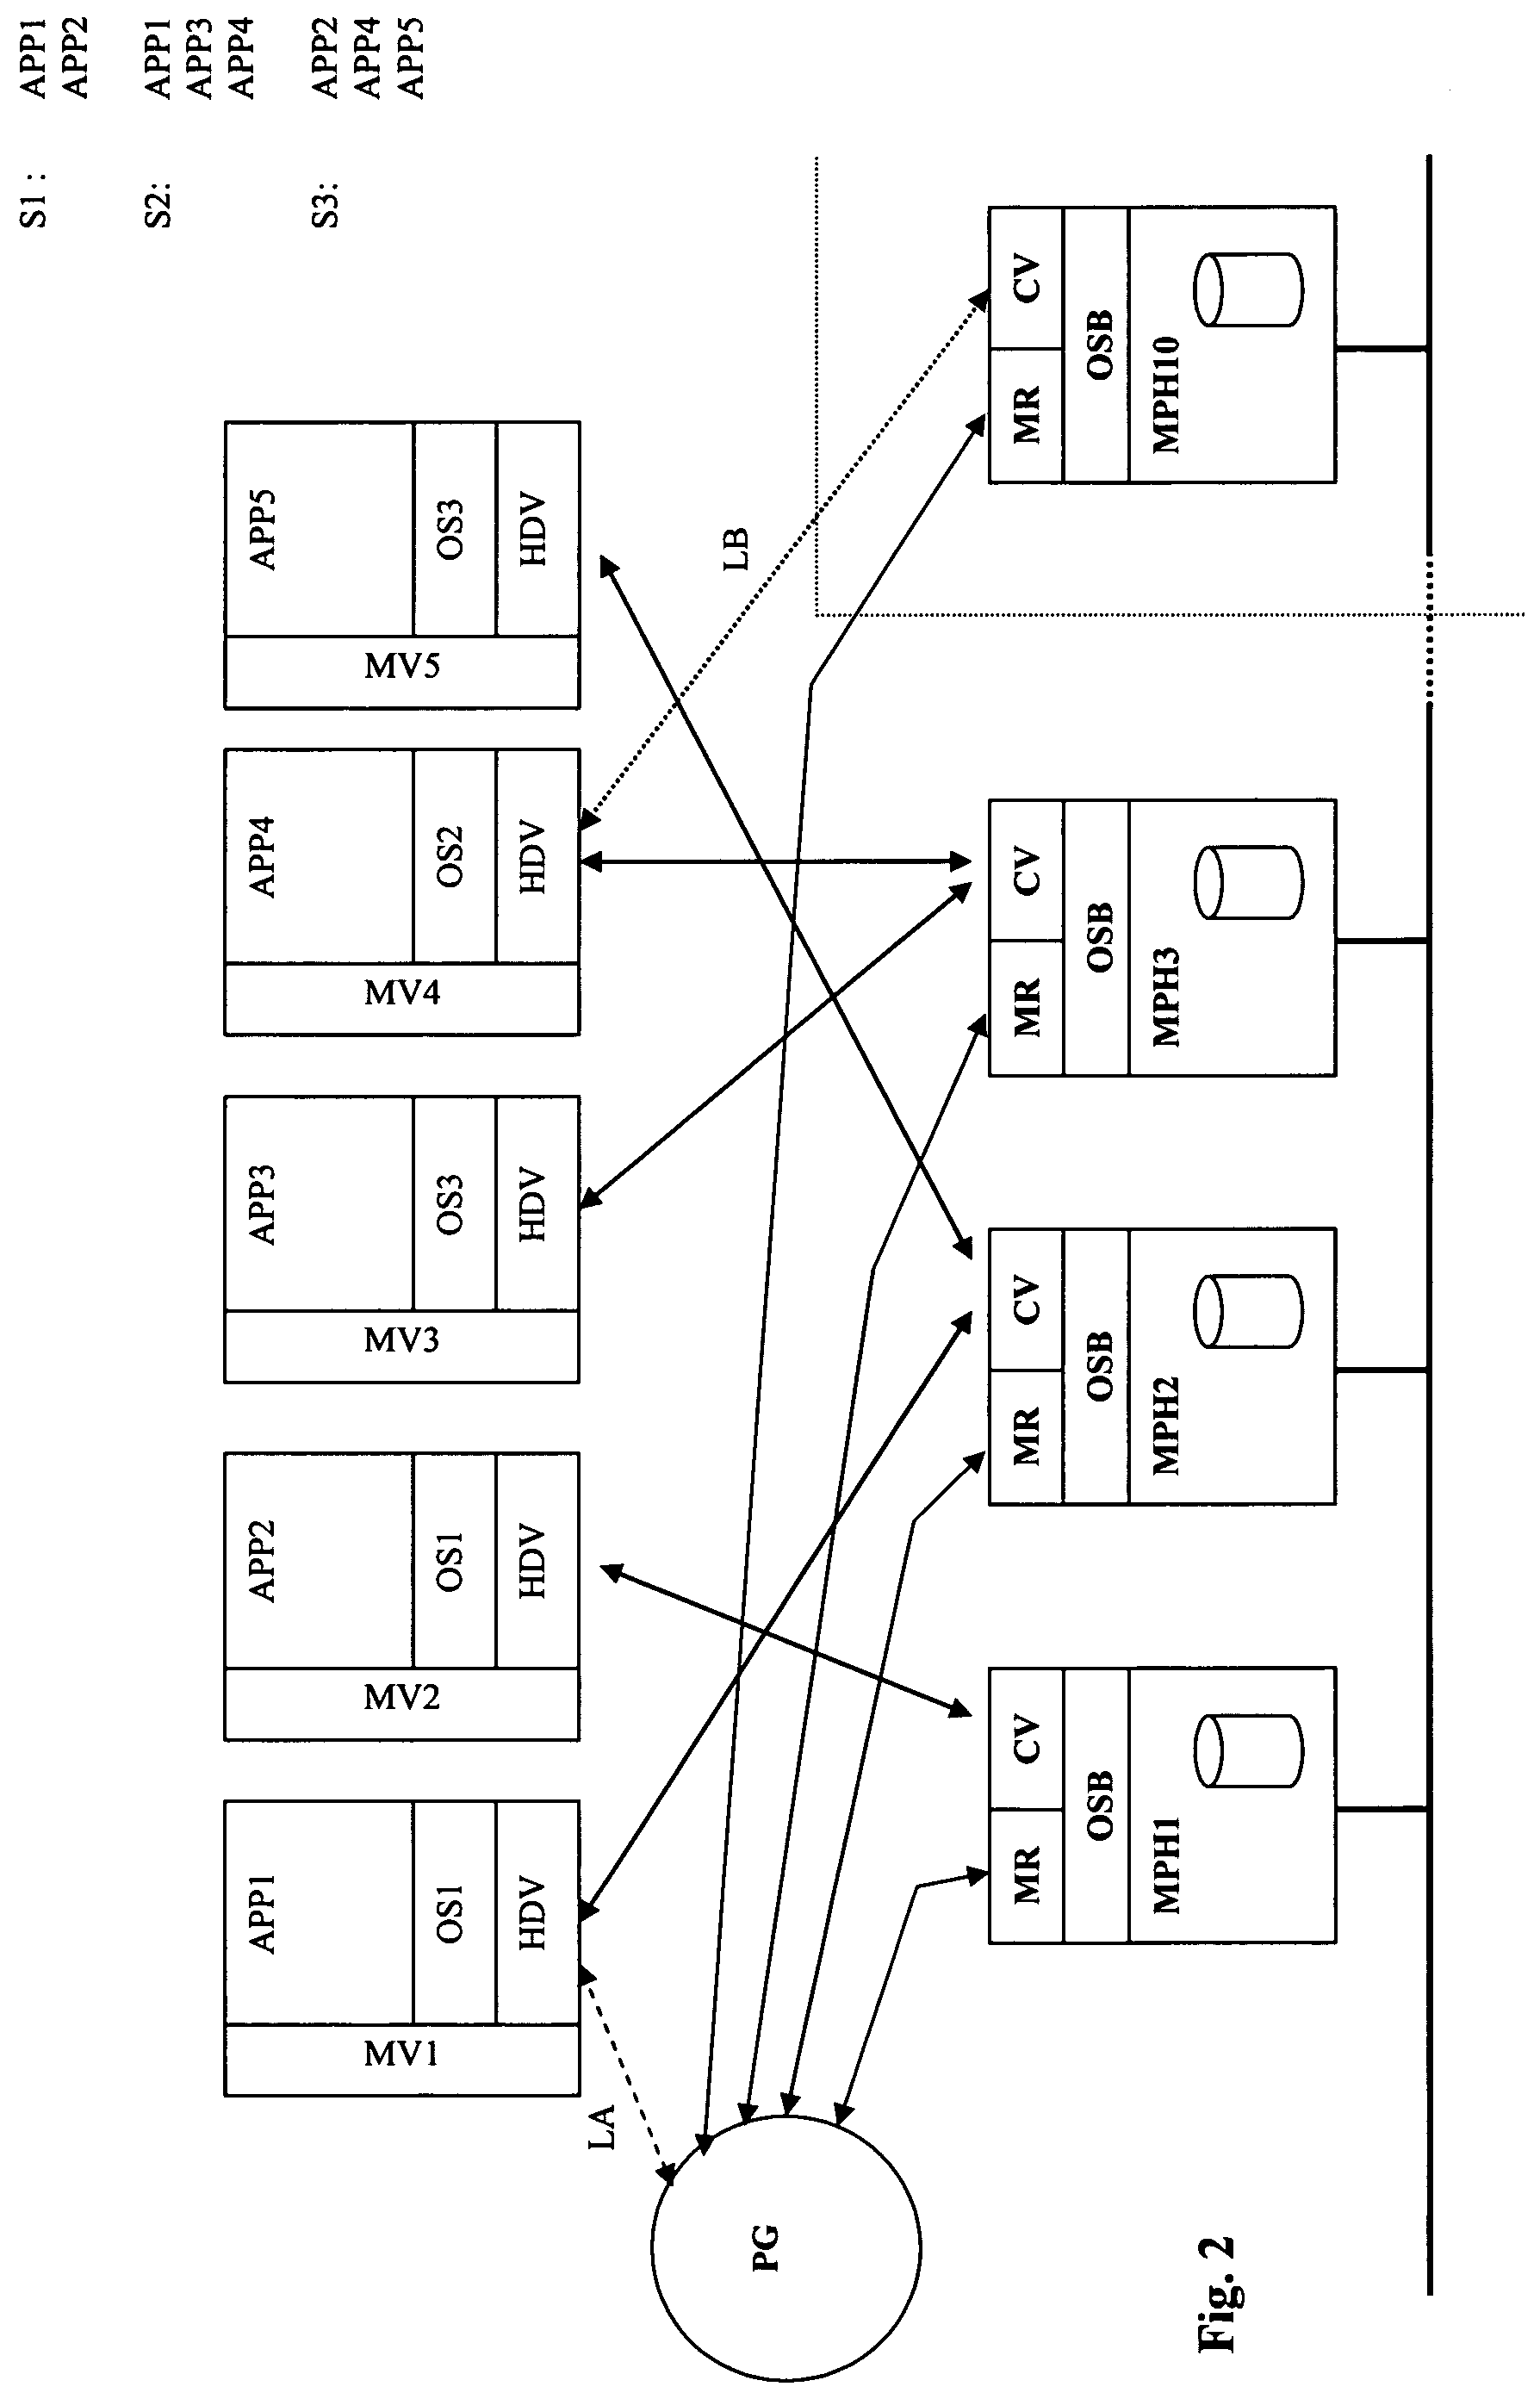 Managing a service having a plurality of applications using virtual machines